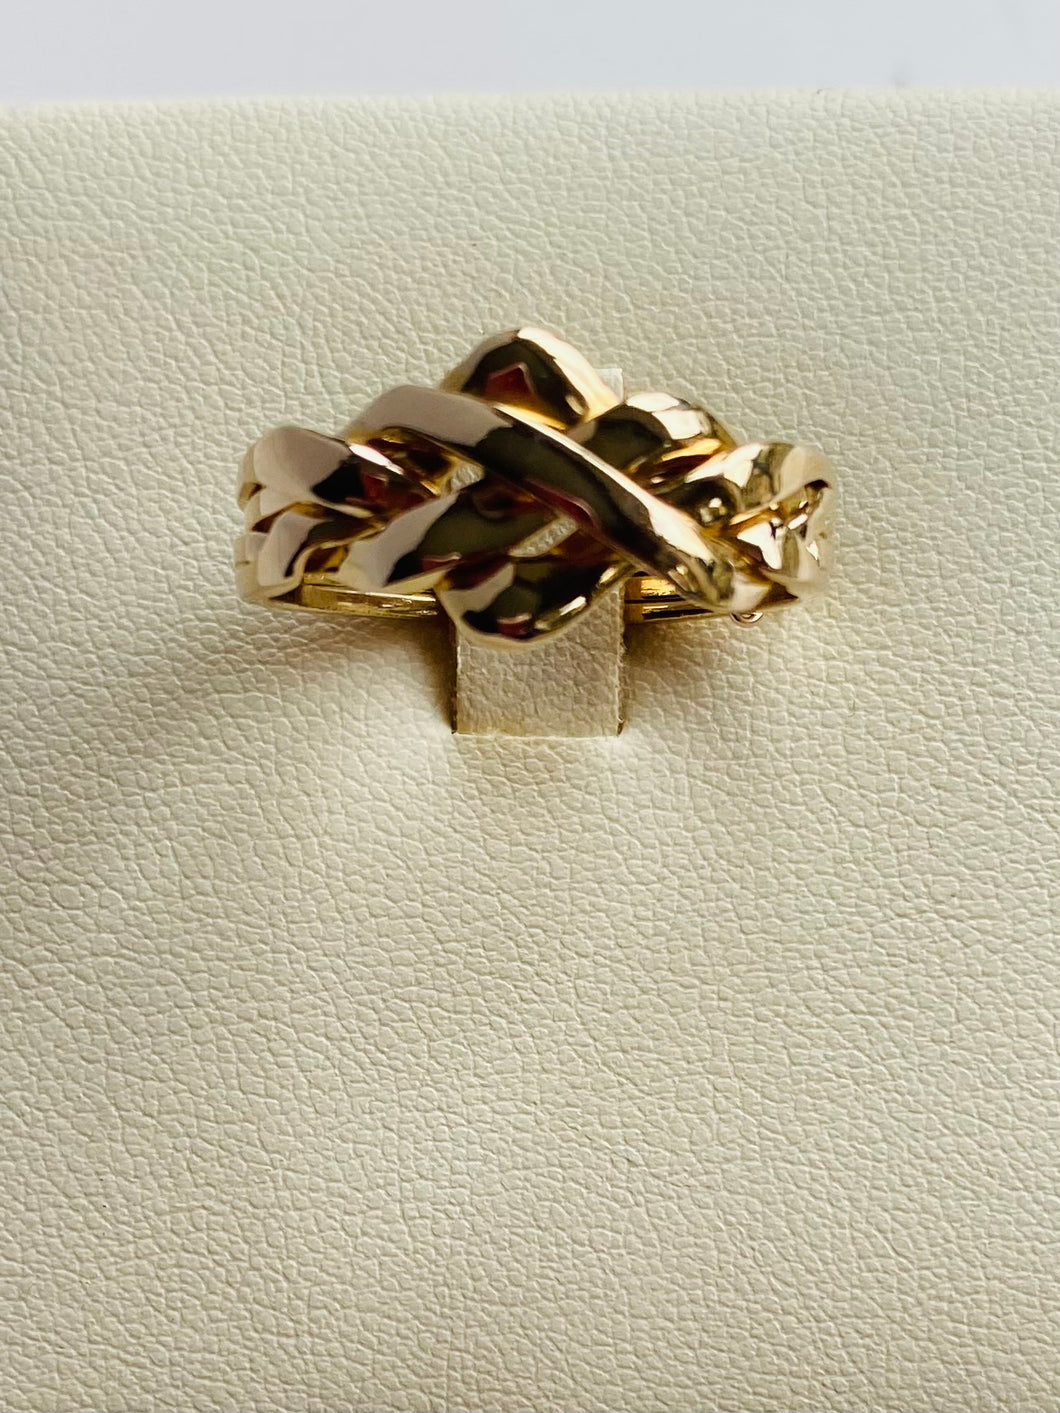 9ct gold puzzle ring